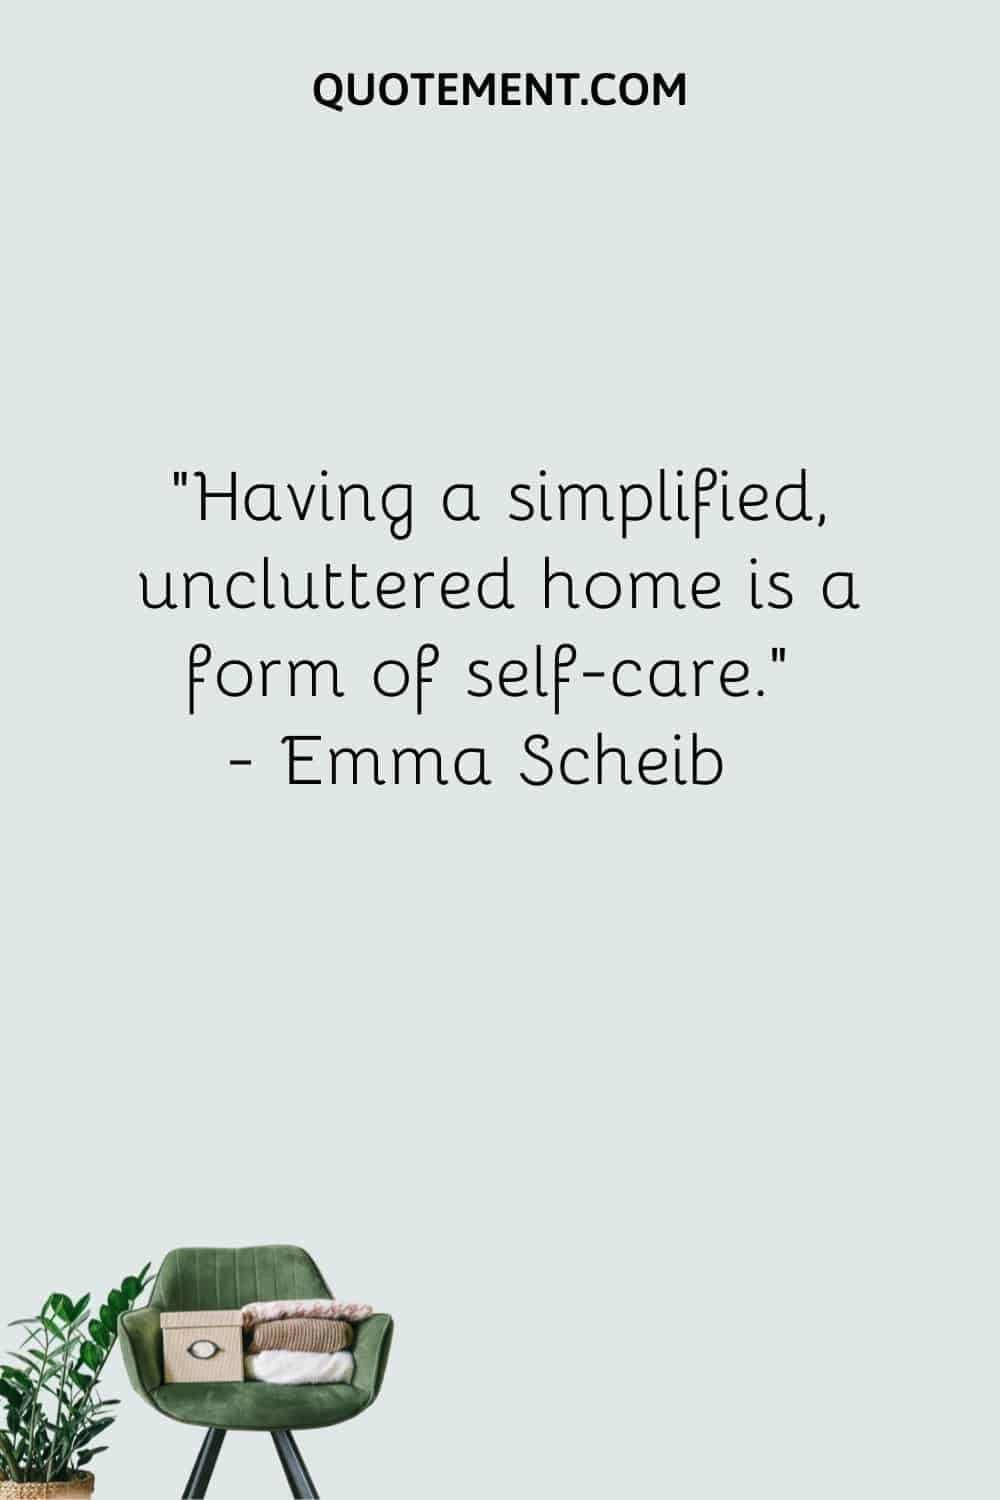 Having a simplified, uncluttered home is a form of self-care